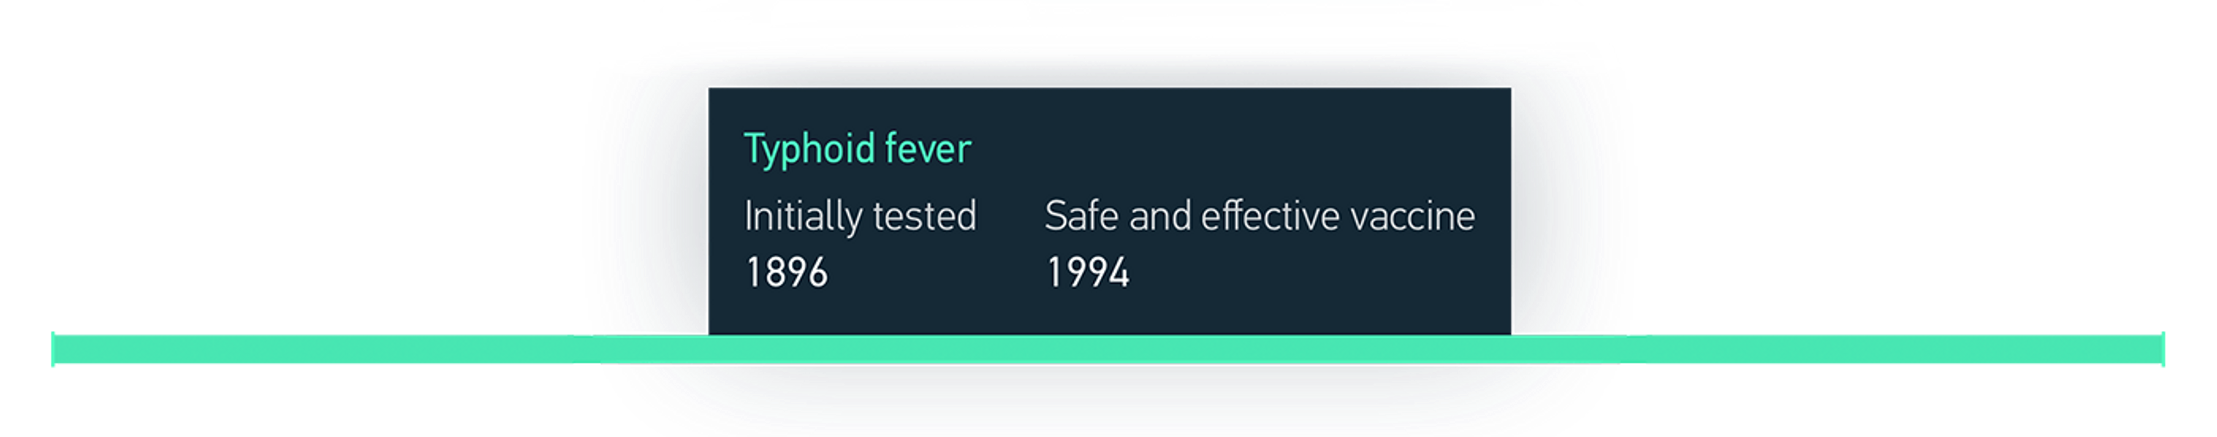 An example of a pop-up that appears when you select a vaccine in the main Outpacing Pandemics visualization. It shows the vaccine for Typhoid fever, which was initially tested in 1896 and had a safe and effective vaccine by 1994.